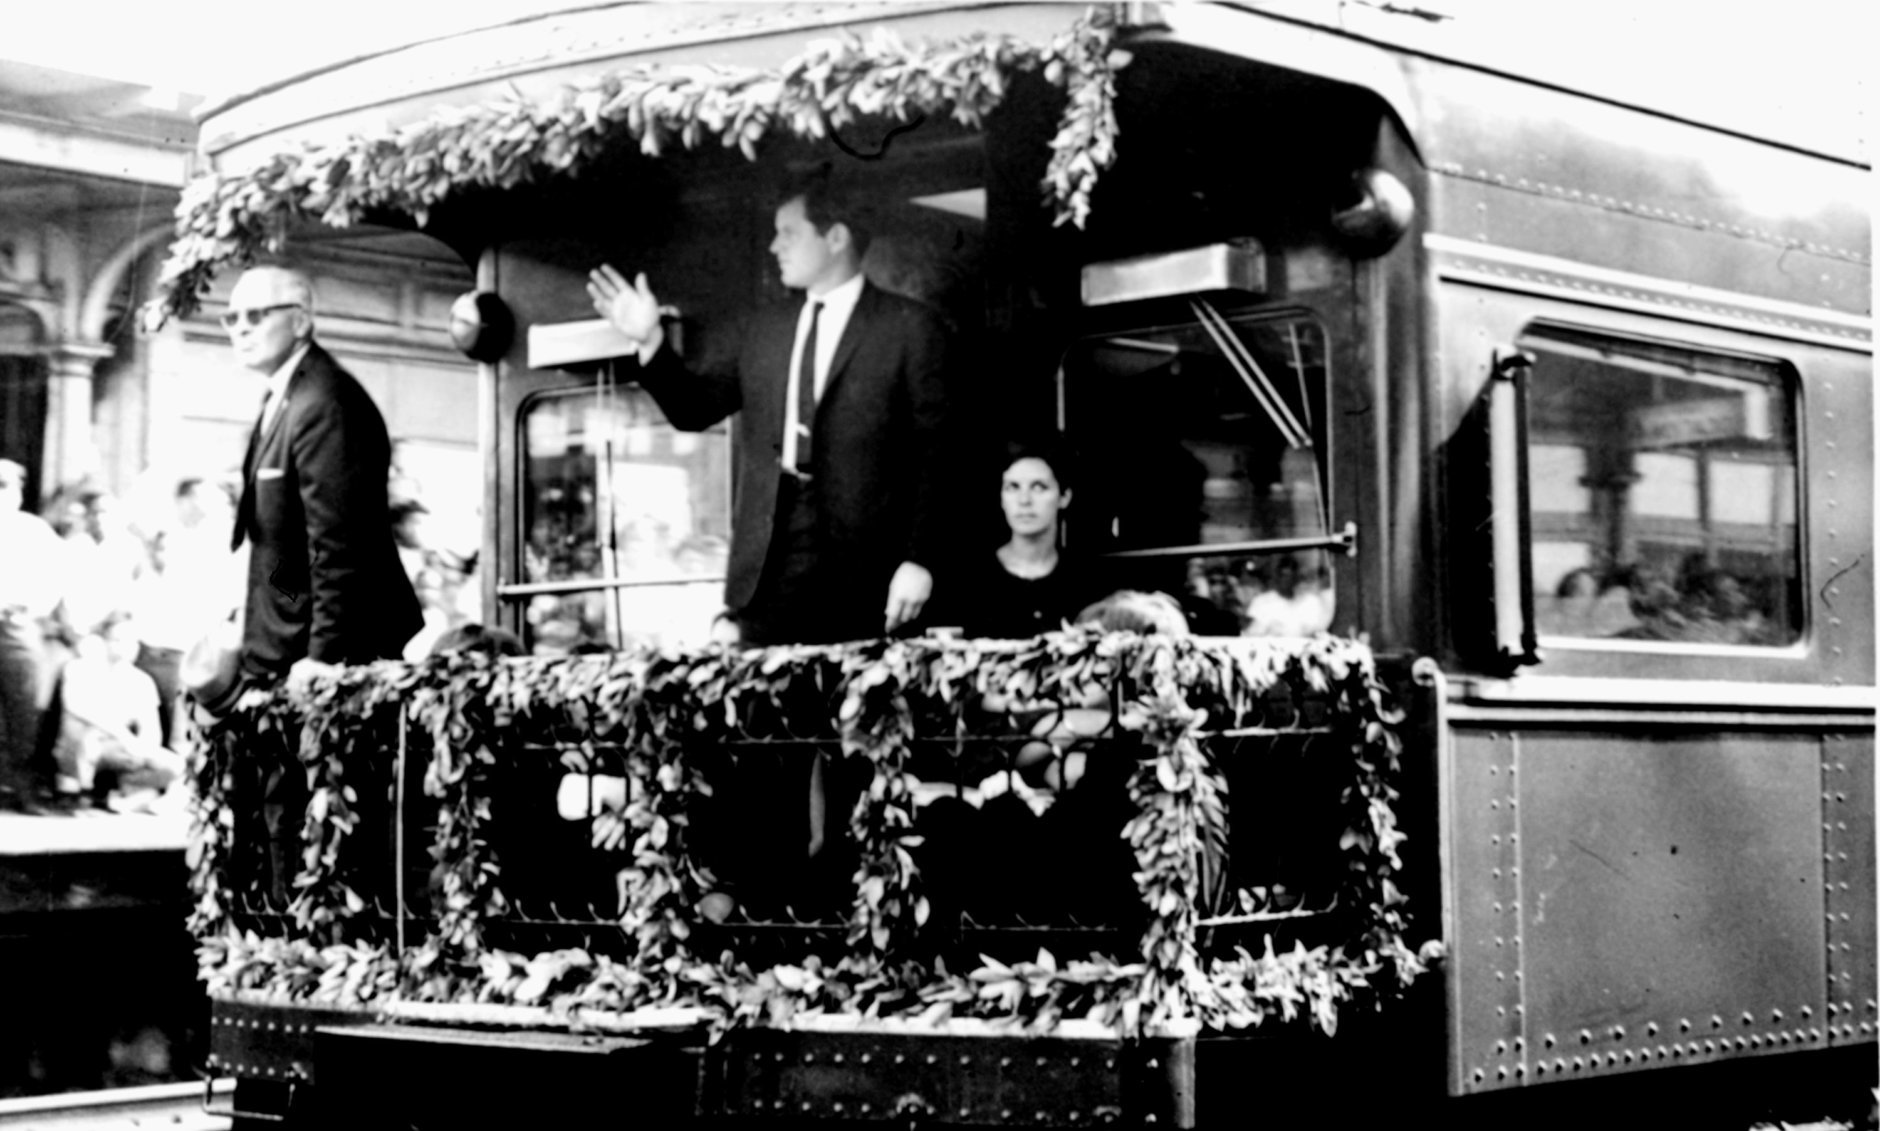 Sen. Edward M. Kennedy waves from the rear platform of the observation car bearing the remains of his slain brother, Sen. Robert F. Kennedy, as the funeral train passed through North Philadelphia Station, June 8, 1968.  Others on platform are unidentified.  (AP Photo)